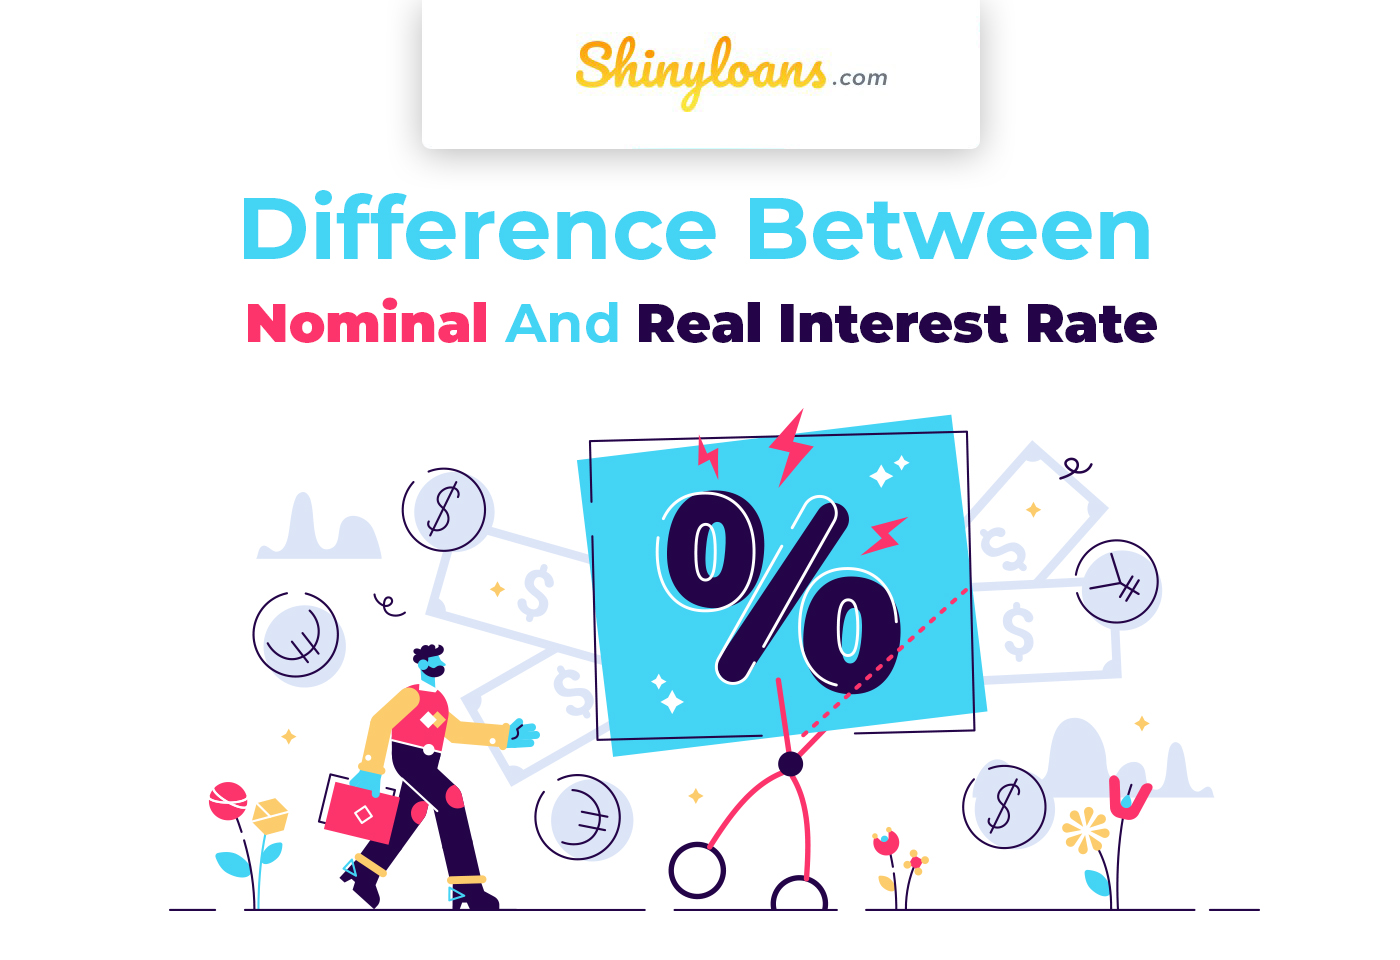 Difference Between Nominal And Real Interest Rate